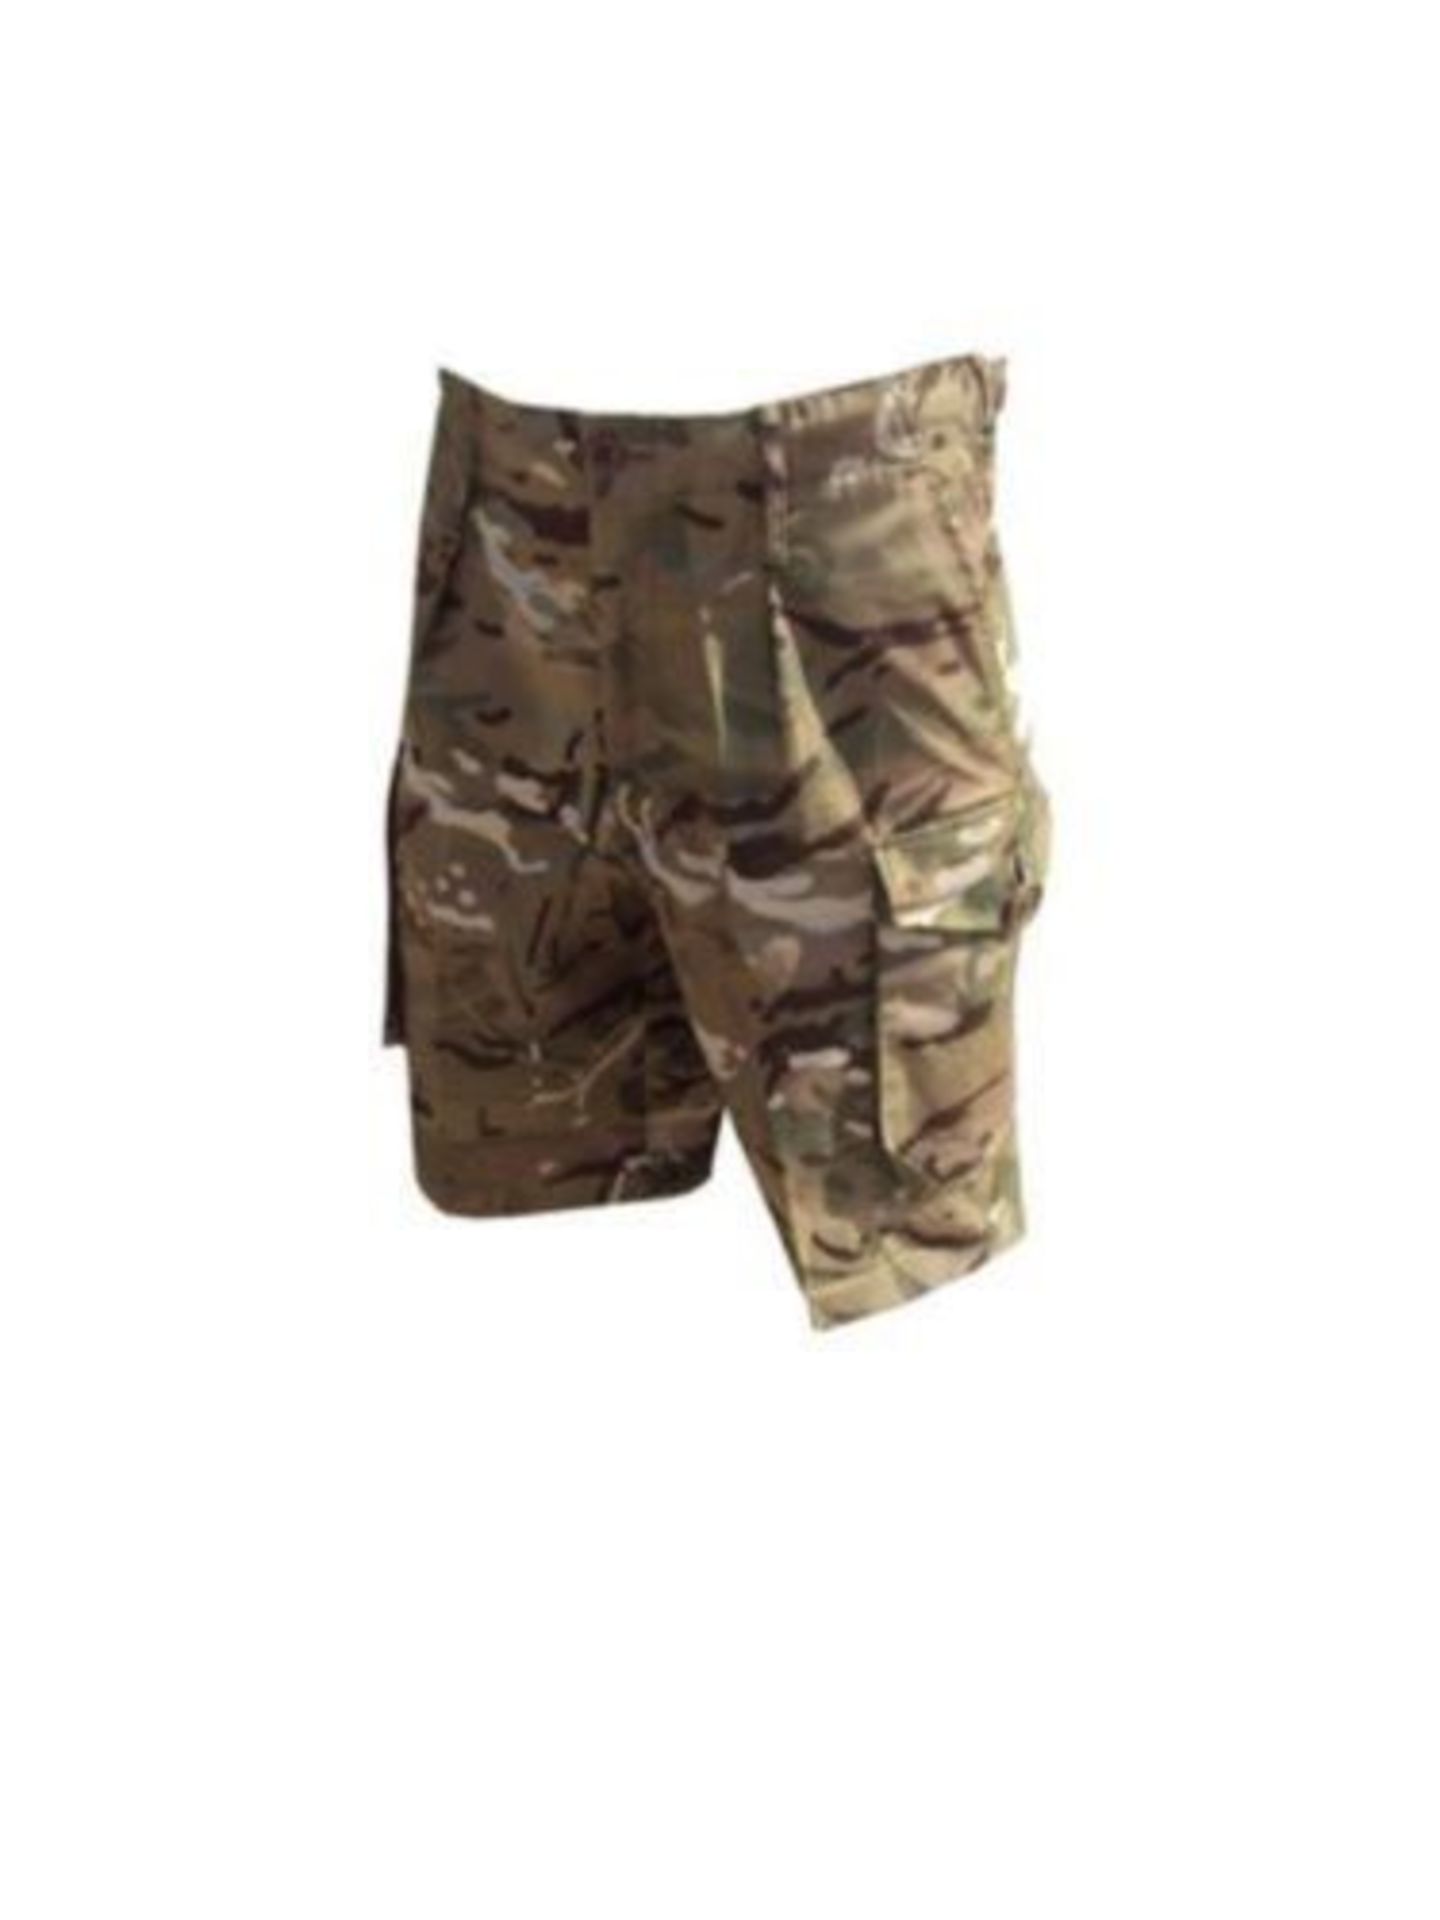 PACK OF 10 - MTP SHORTS - MIX OF SIZES - BRAND NEW